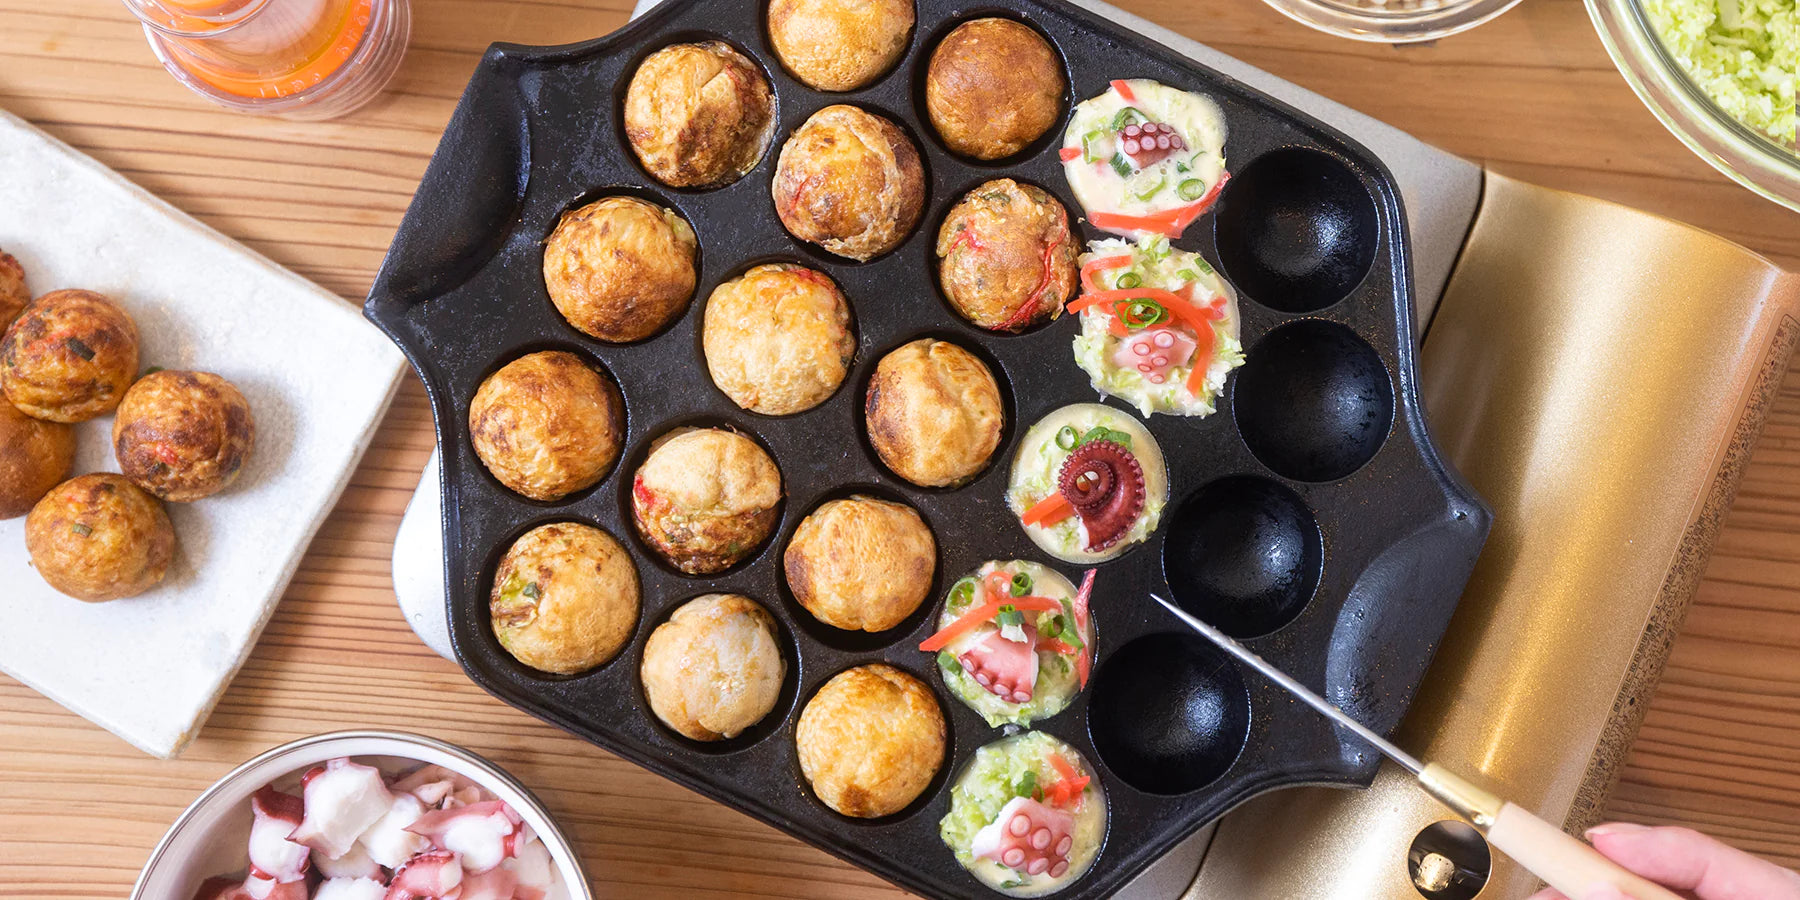 Discover our great selection of Takoyaki Pans at Globalkitchen Japan.